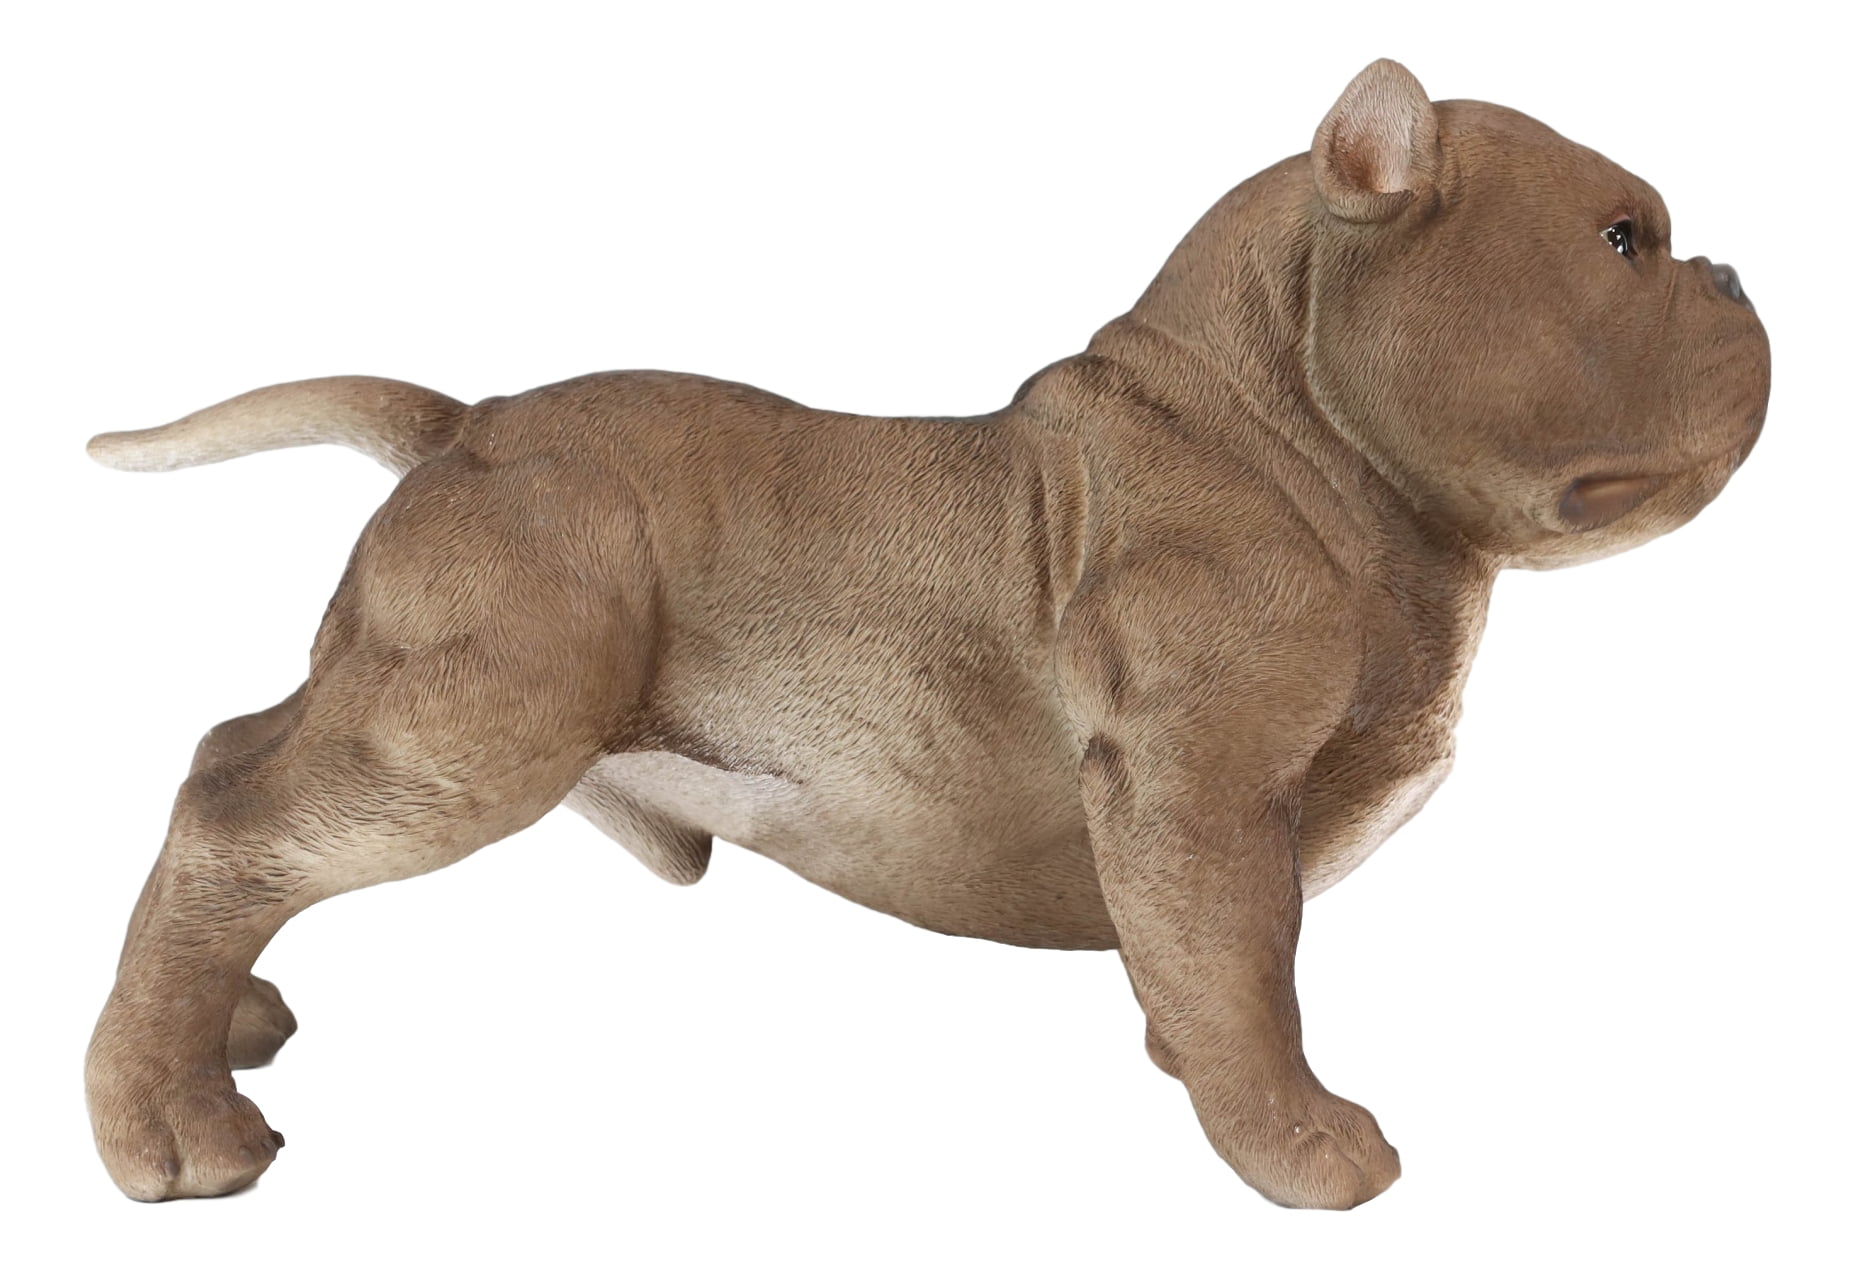 3,048 Small American Bully Dog Images, Stock Photos, 3D objects